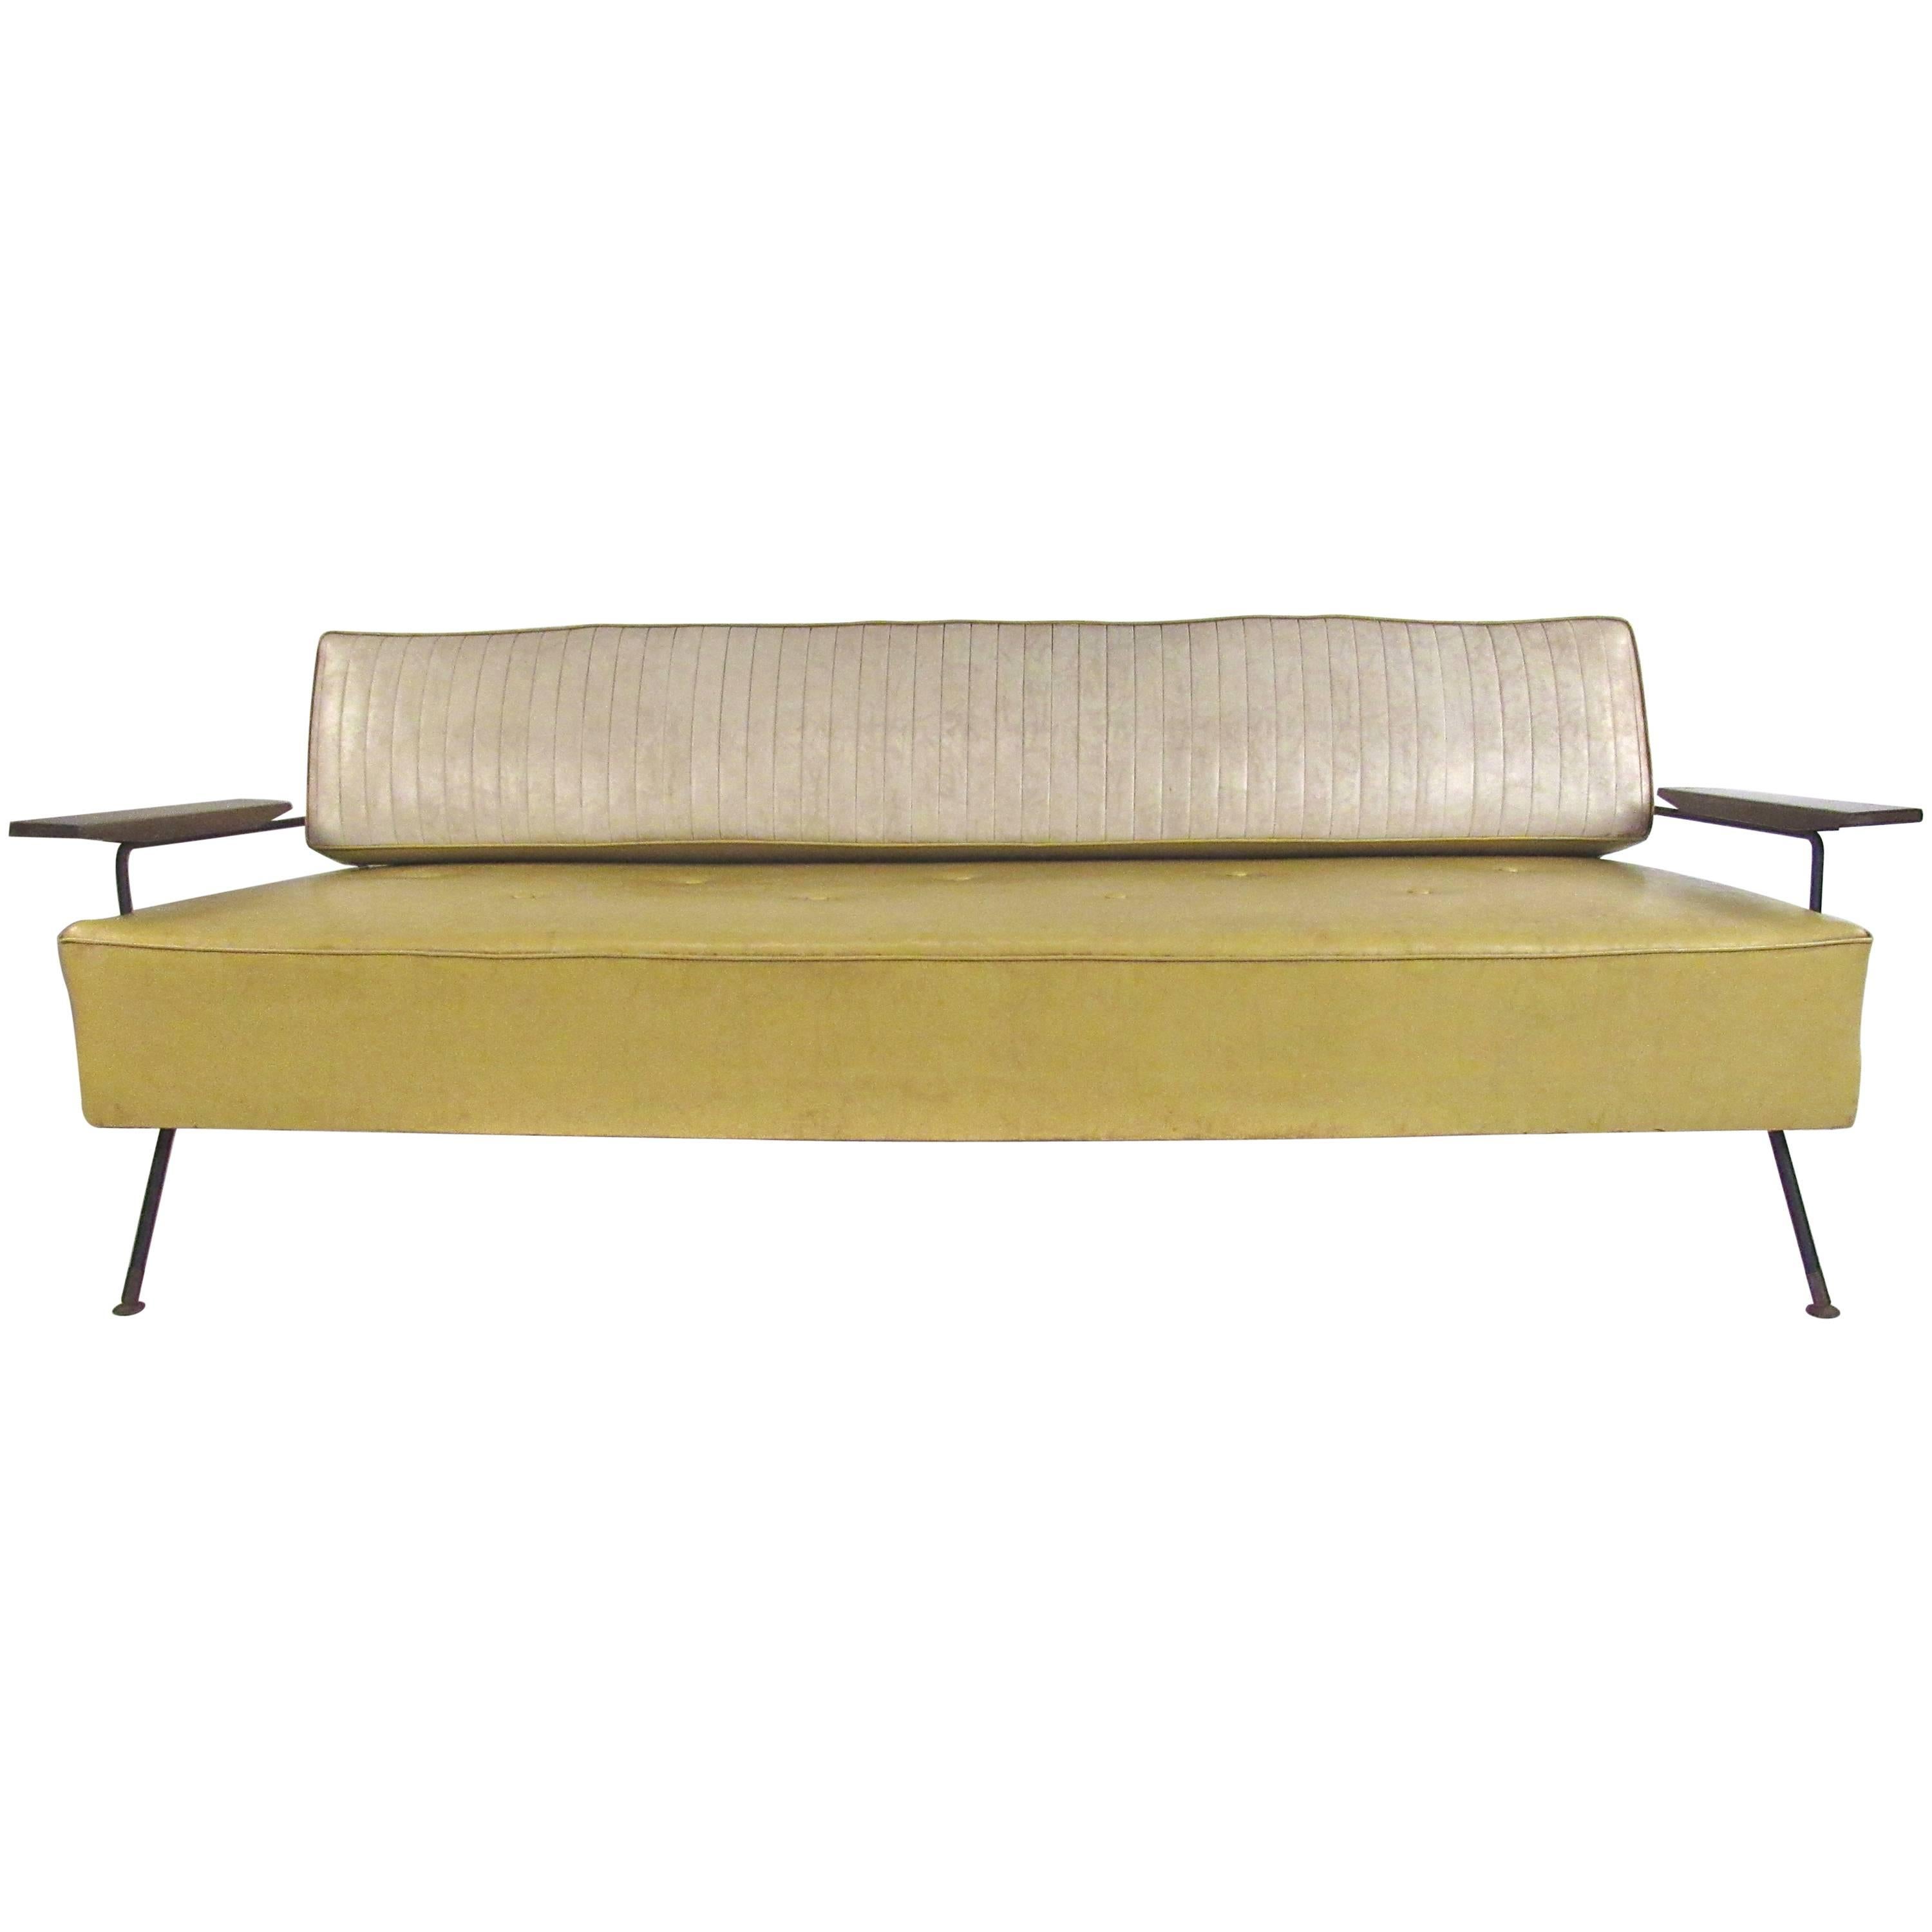 Midcentury Vinyl Daybed by Richard McCarthy for Selrite